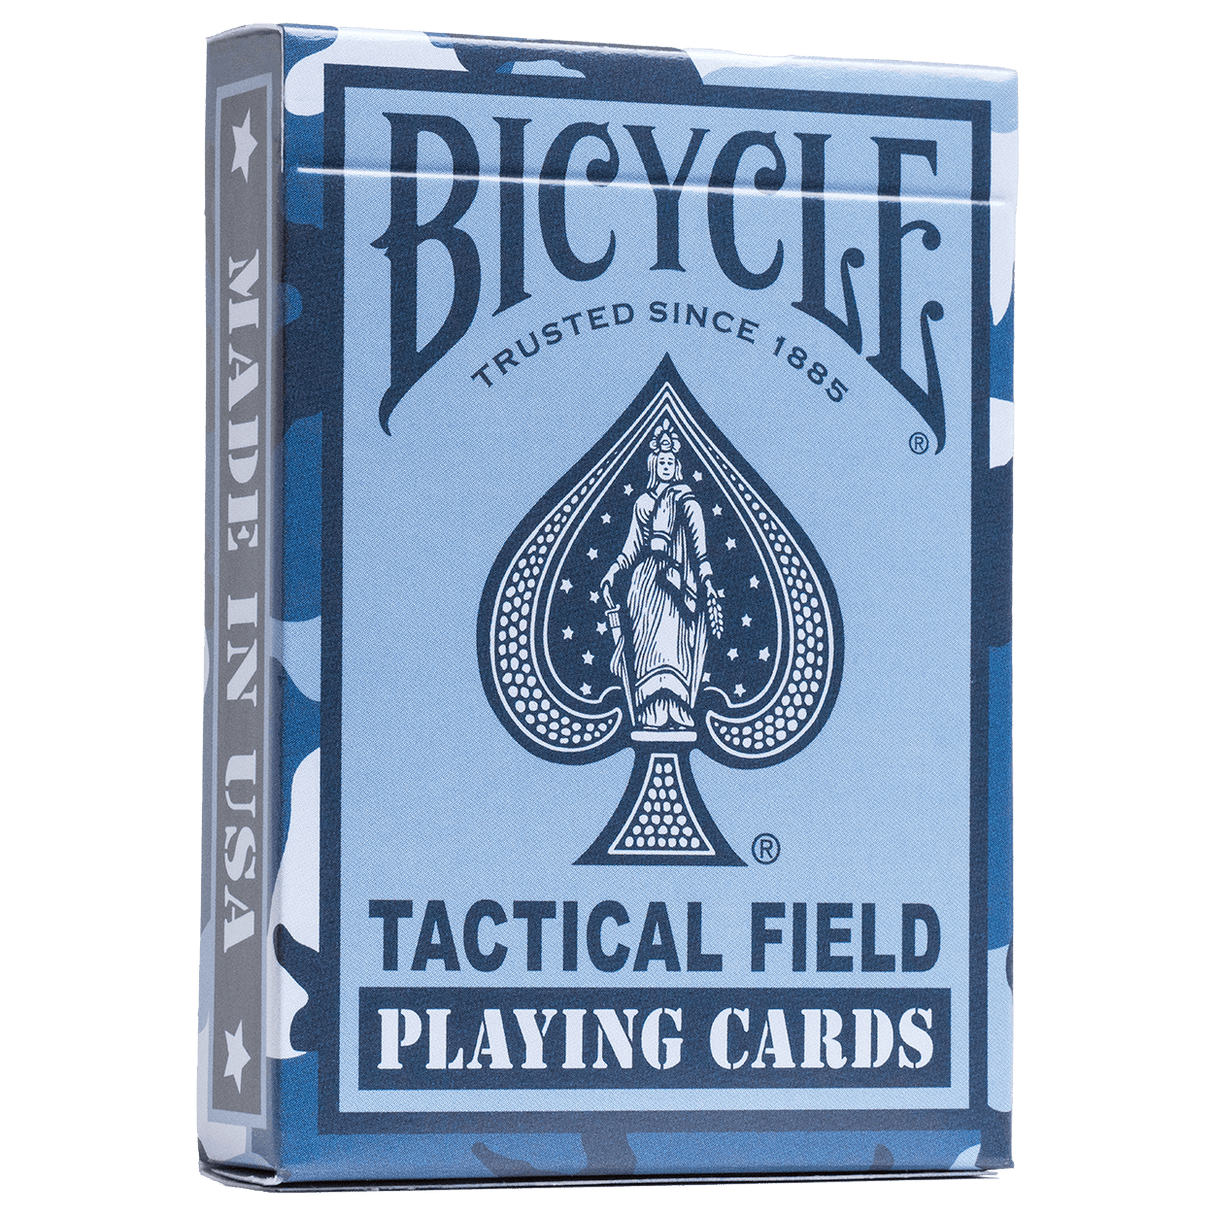 Bicycle Tactical Field Playing Cards (Navy Blue)